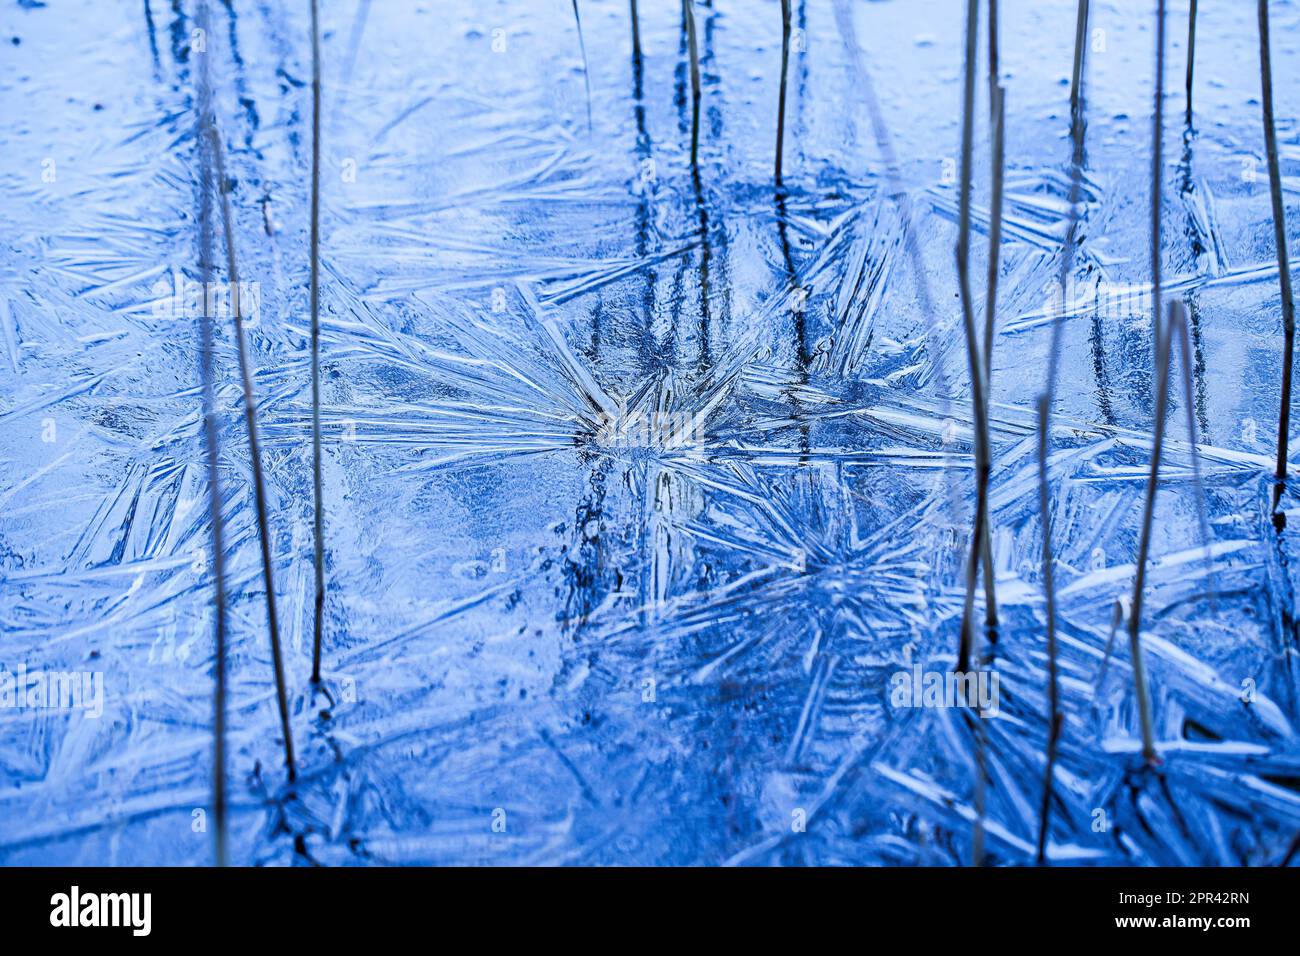 grass blades in ice, Germany Stock Photo